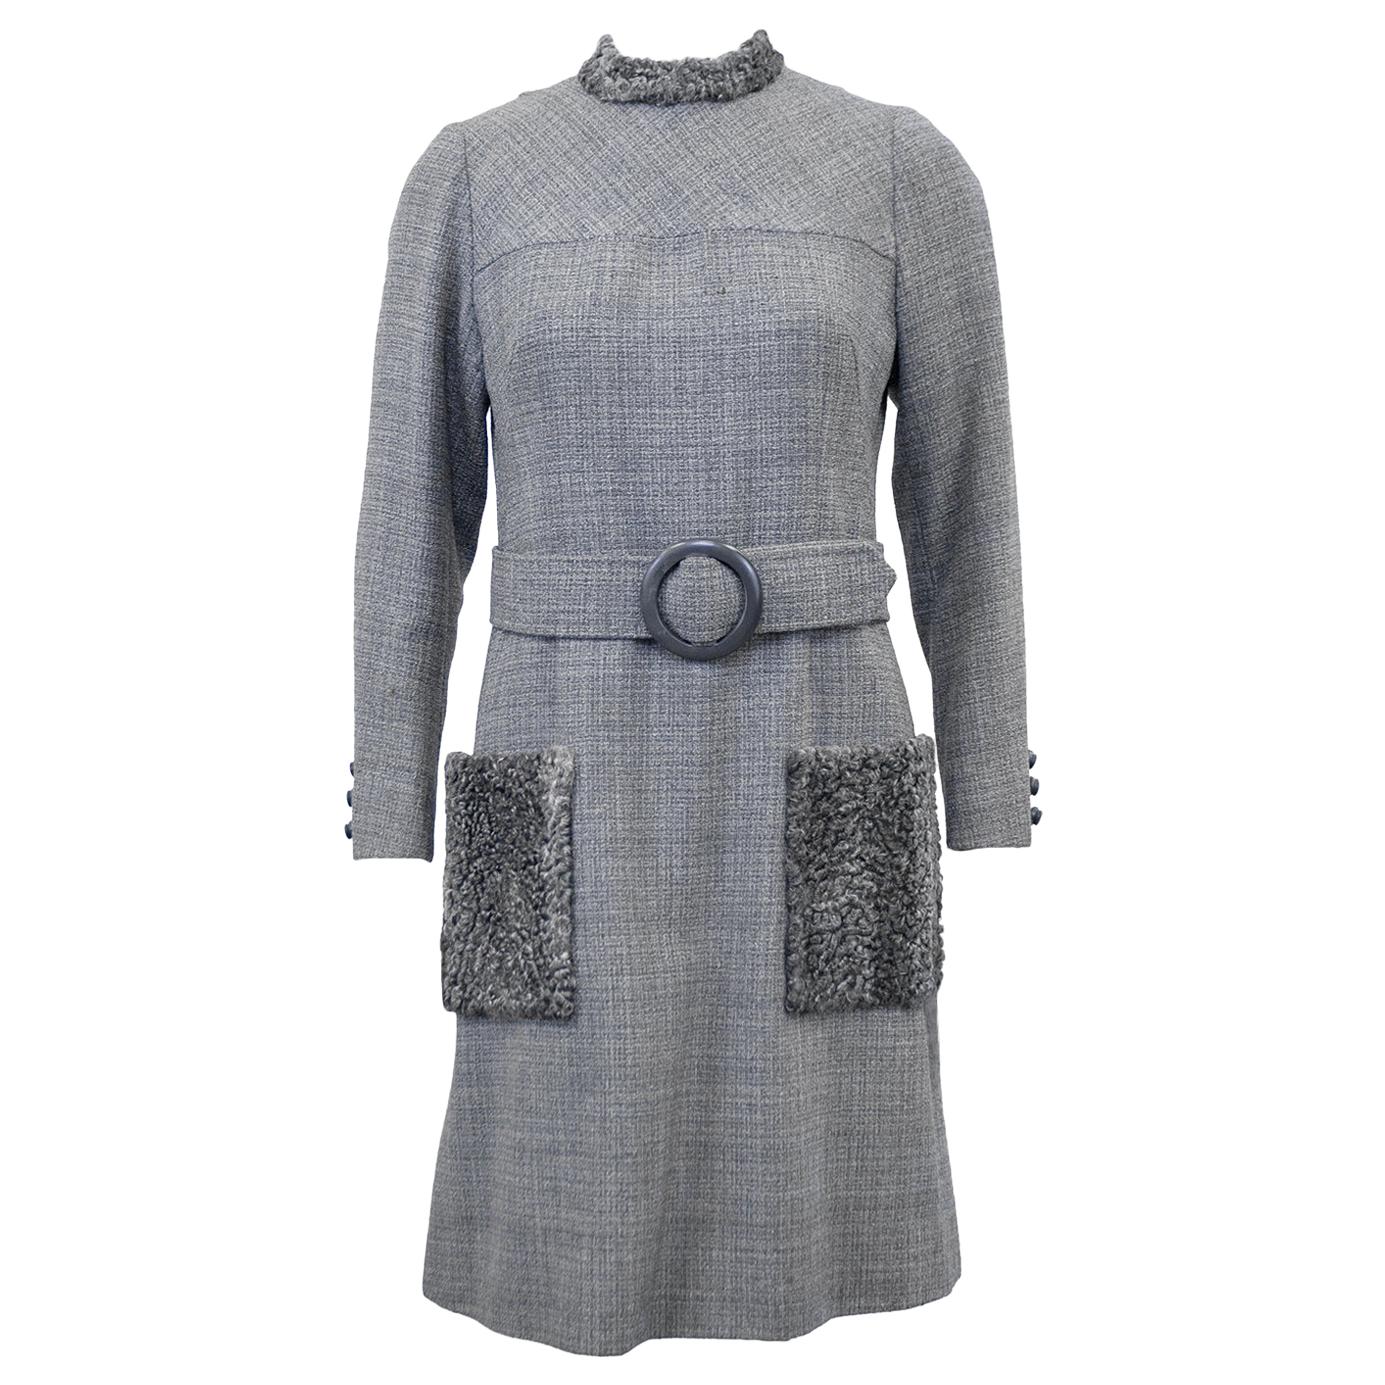 1960s Grey Wool Weave Shift Dress with Persian Lamb Details